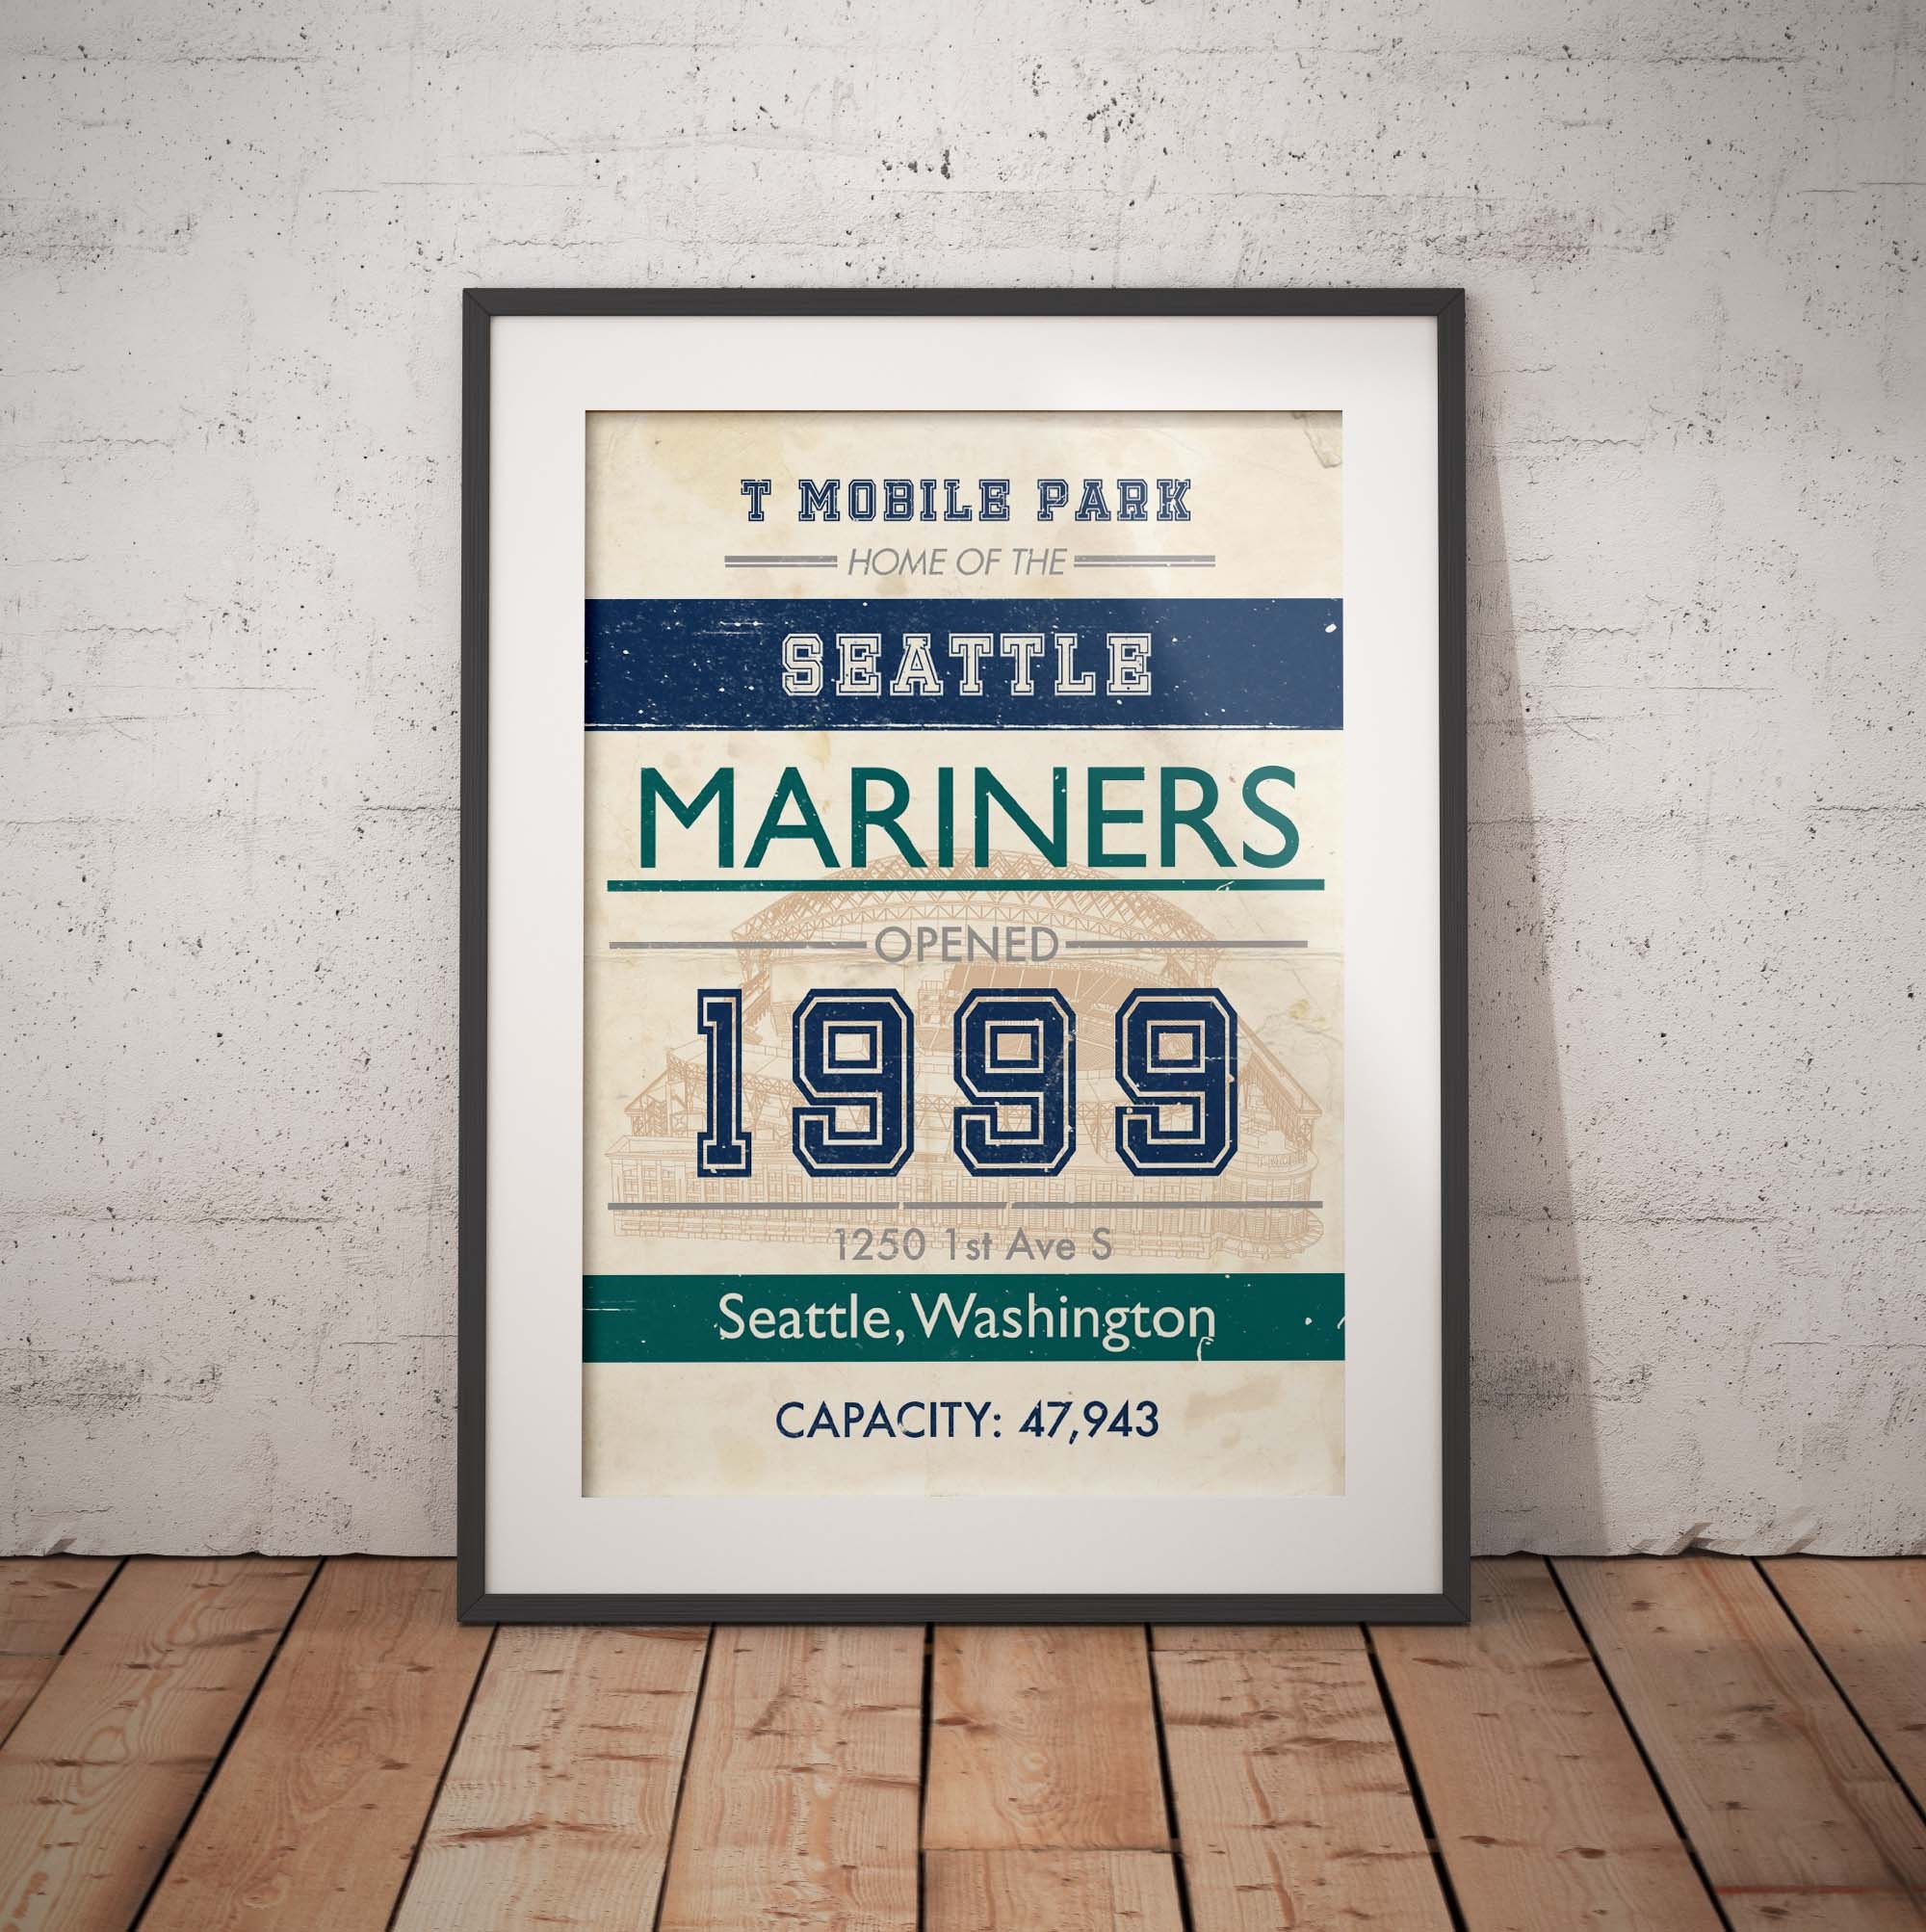 Mariners Team Store - 1250 1st Ave S